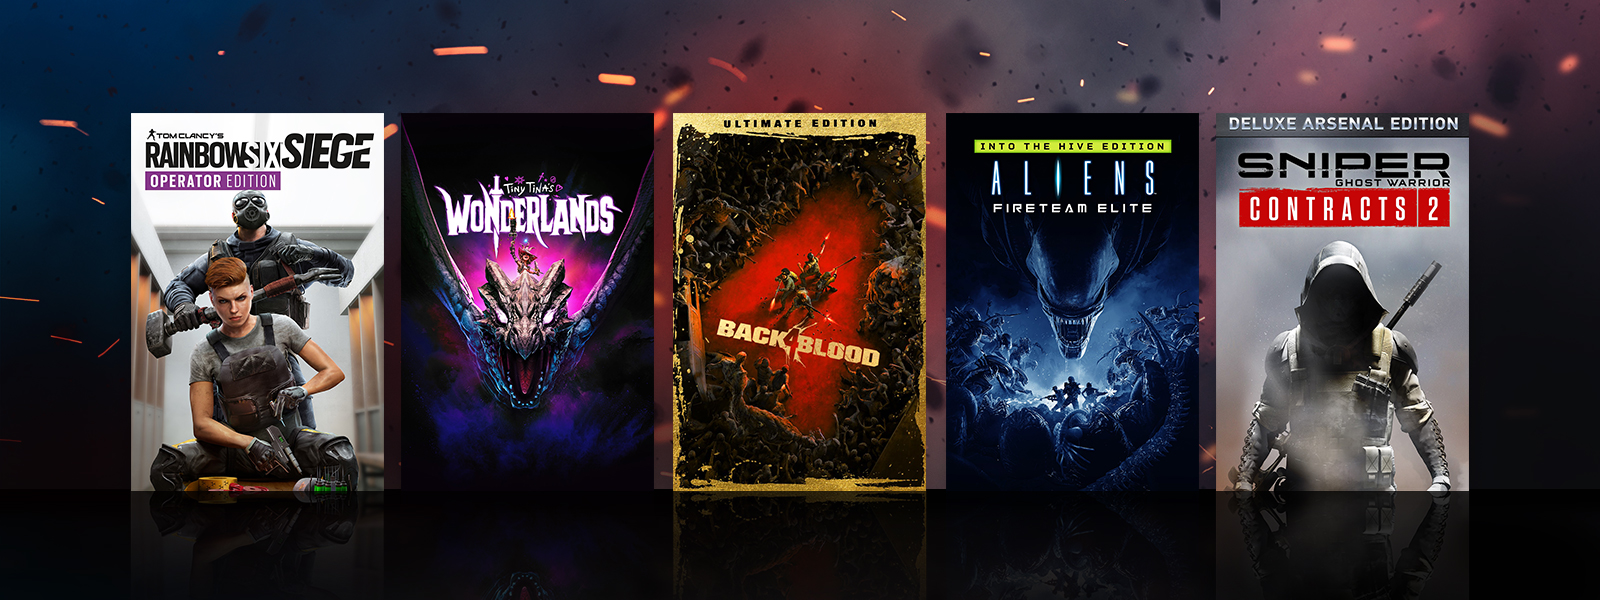 Box art from games that are part of the Shooter Sale, including Tiny Tina’s Wonderlands, Back 4 Blood: Ultimate Edition, and Aliens: Fireteam Elite Into the Hive Edition.